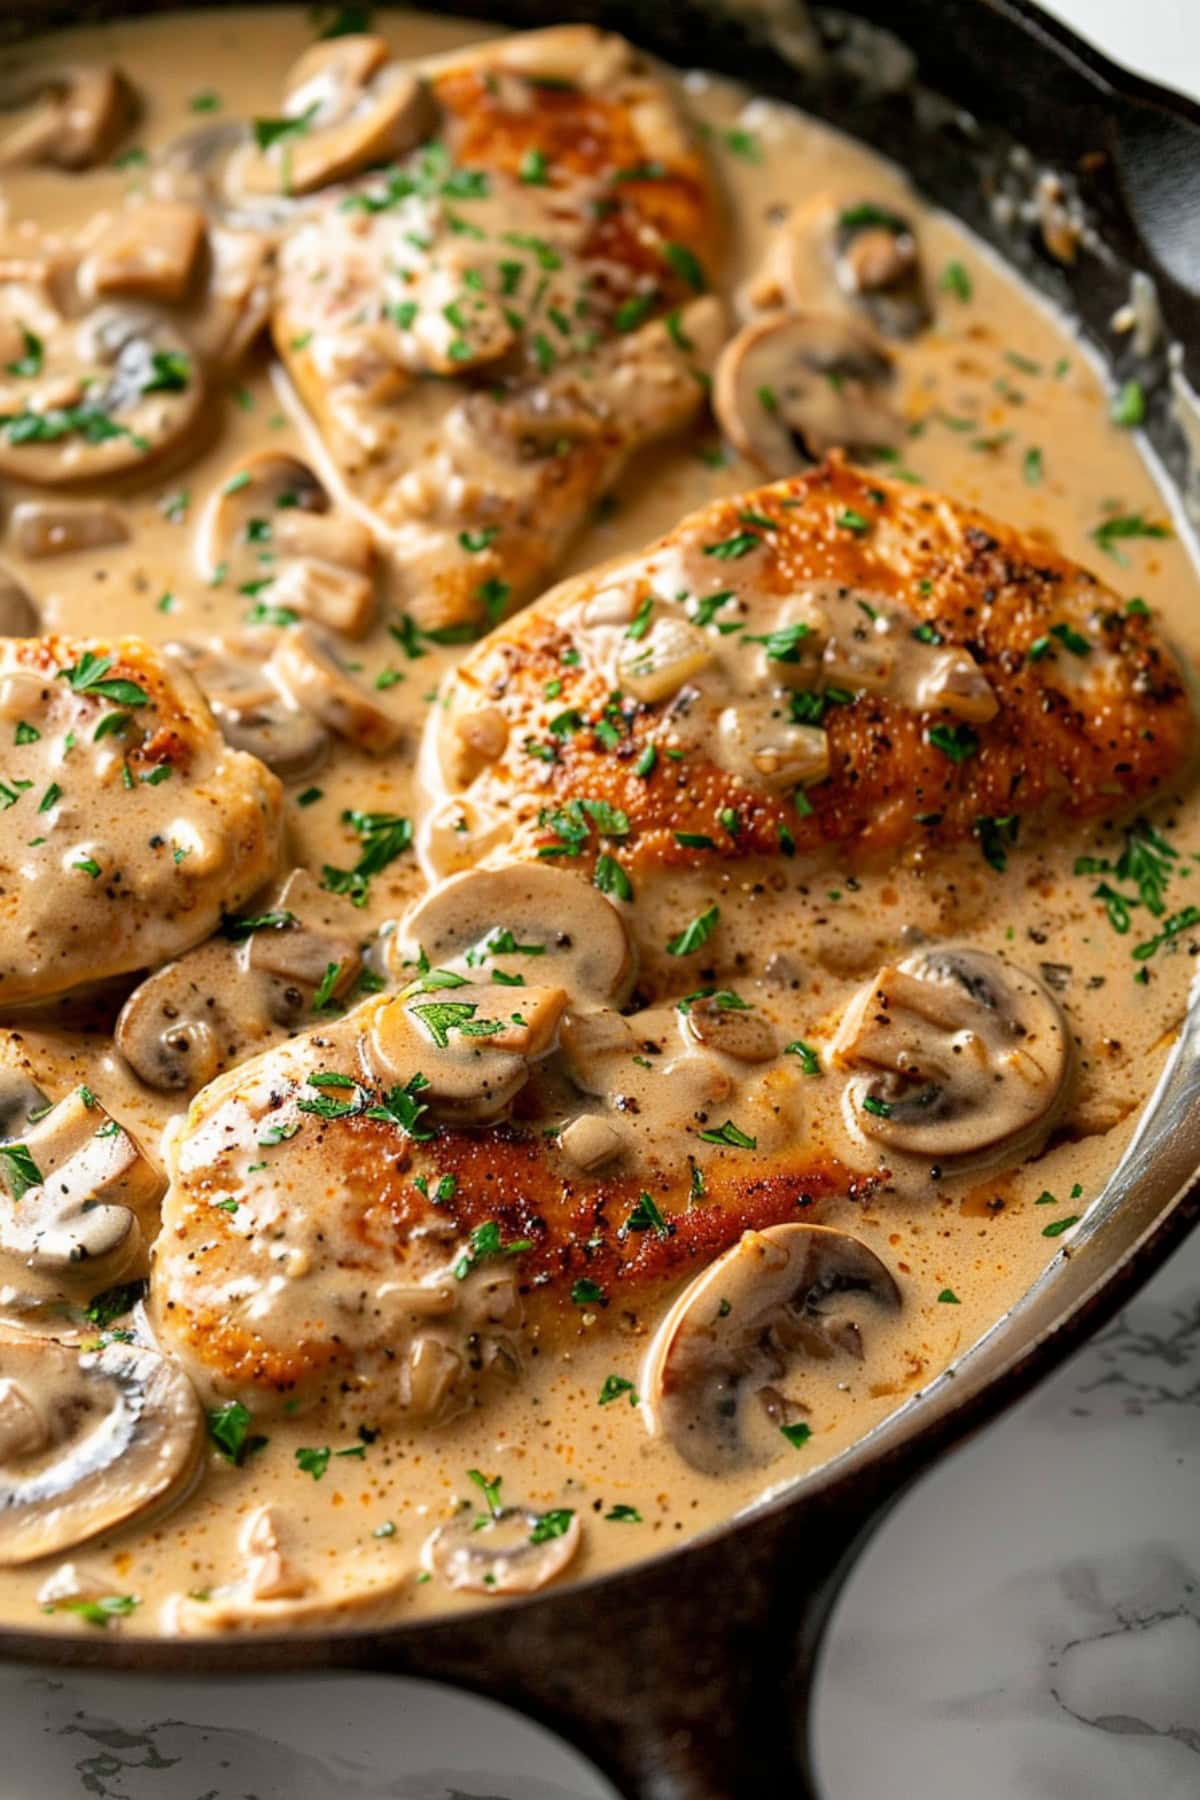 Creamy chicken stroganoff with mushroom cooked in a cast iron skillet.